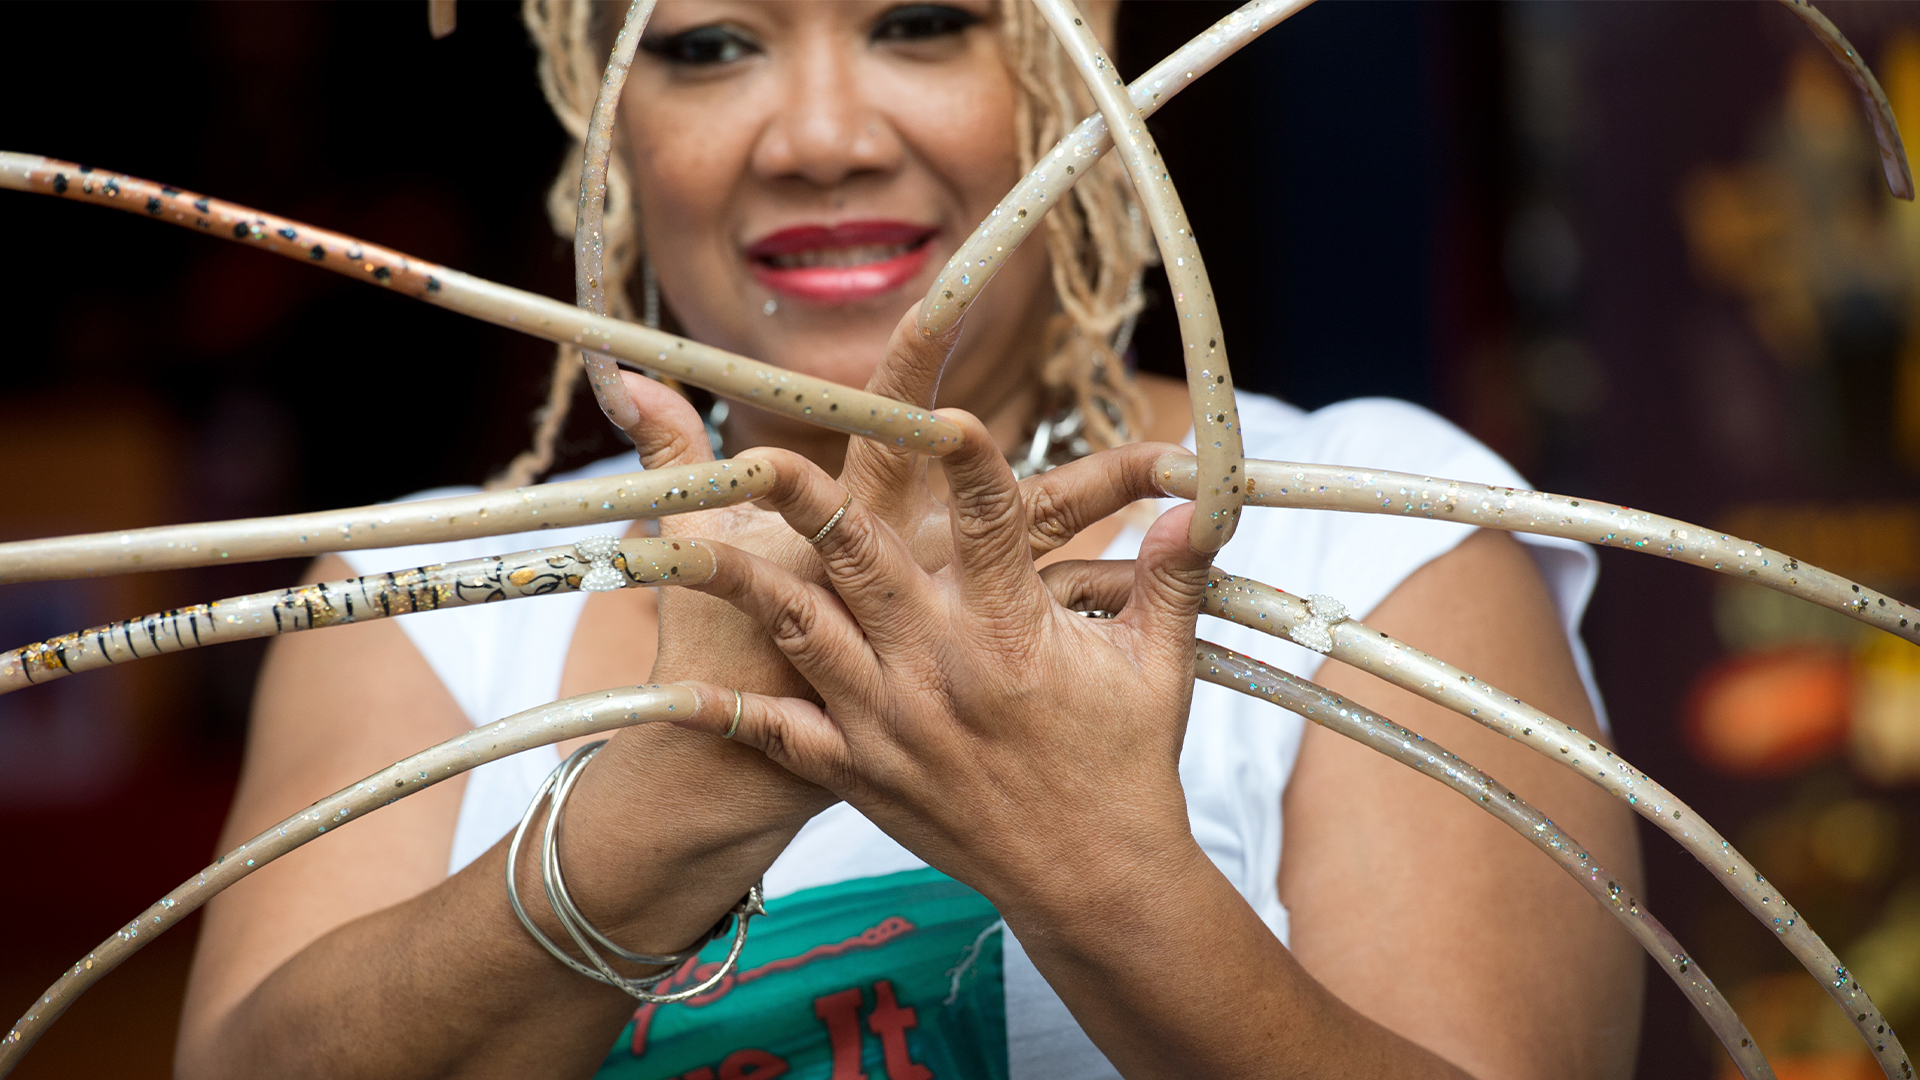 Watch Ayanna Williams, the woman with the world's longest nails, cut them  after 30 years | My Imperfect Life